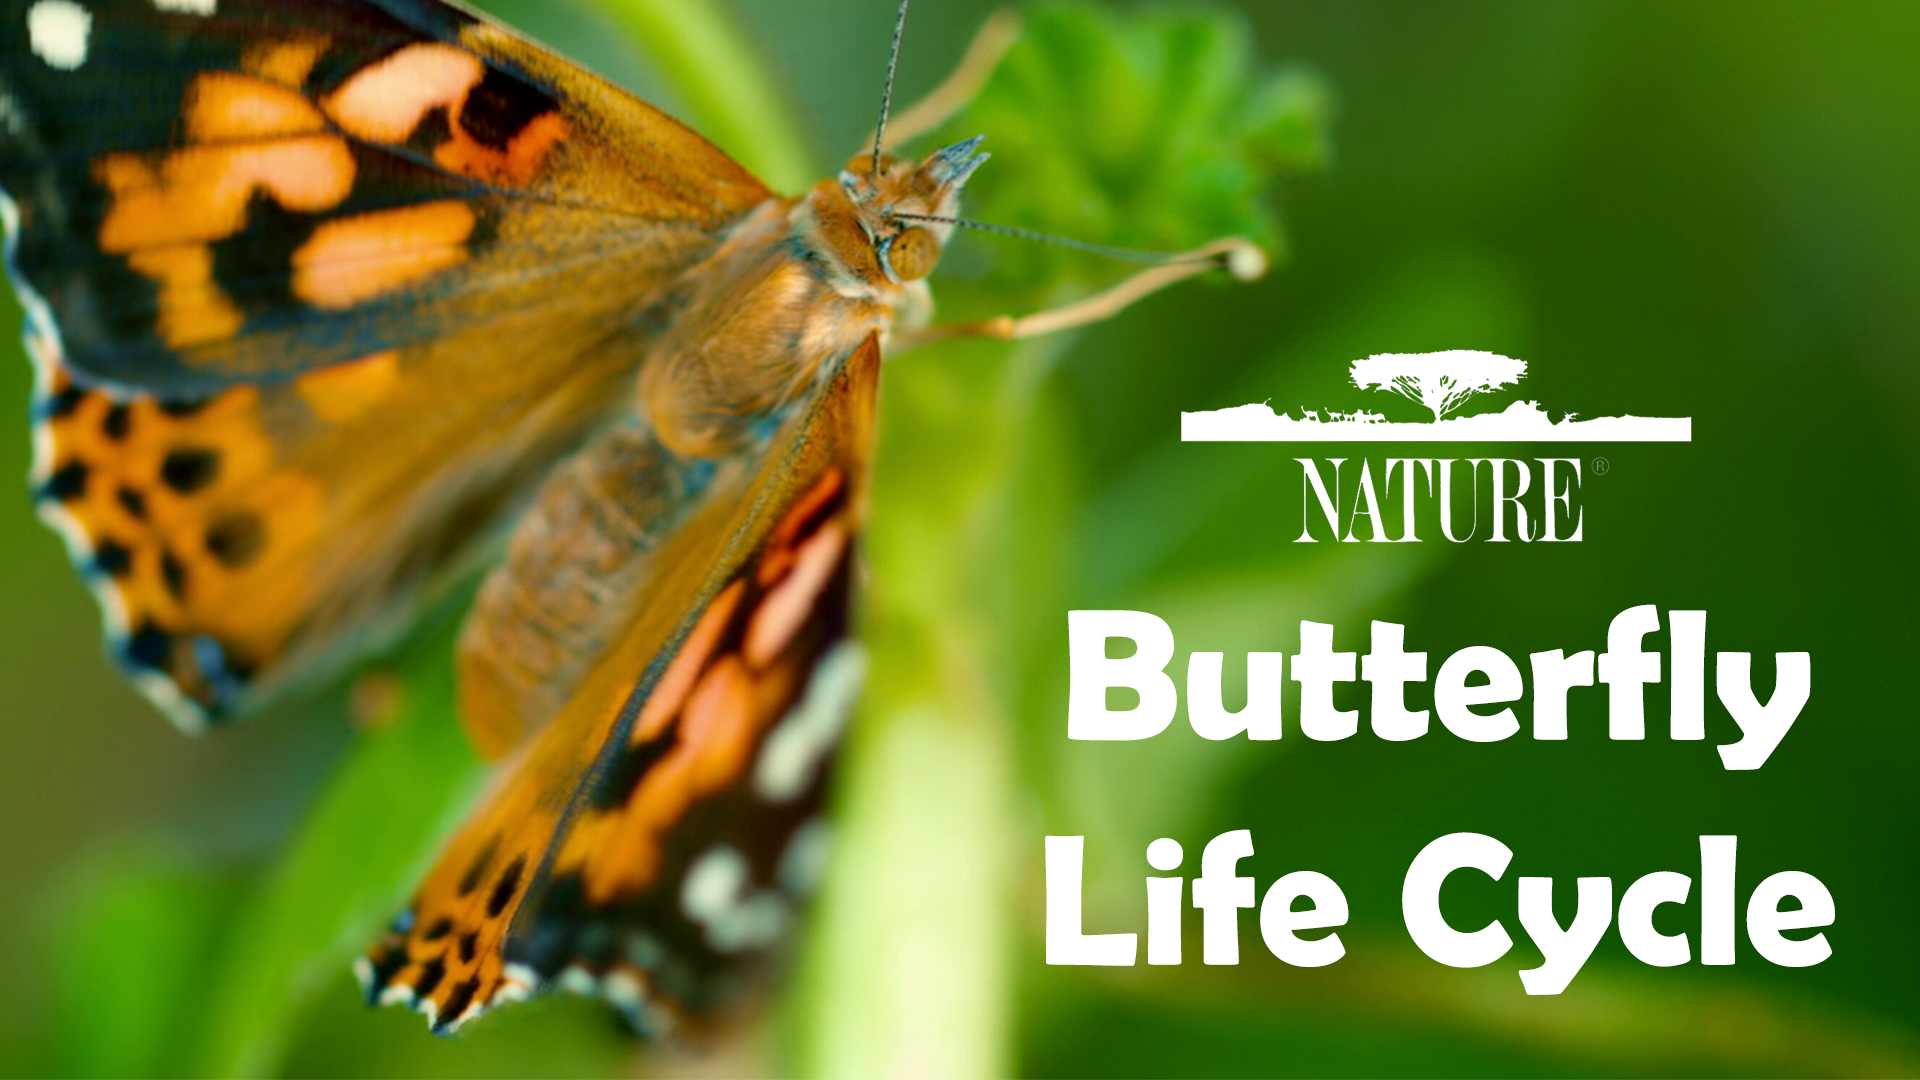 4th Grade Life Cycle Of A Butterfly Lesson Plan Pic Lard - kulturaupice